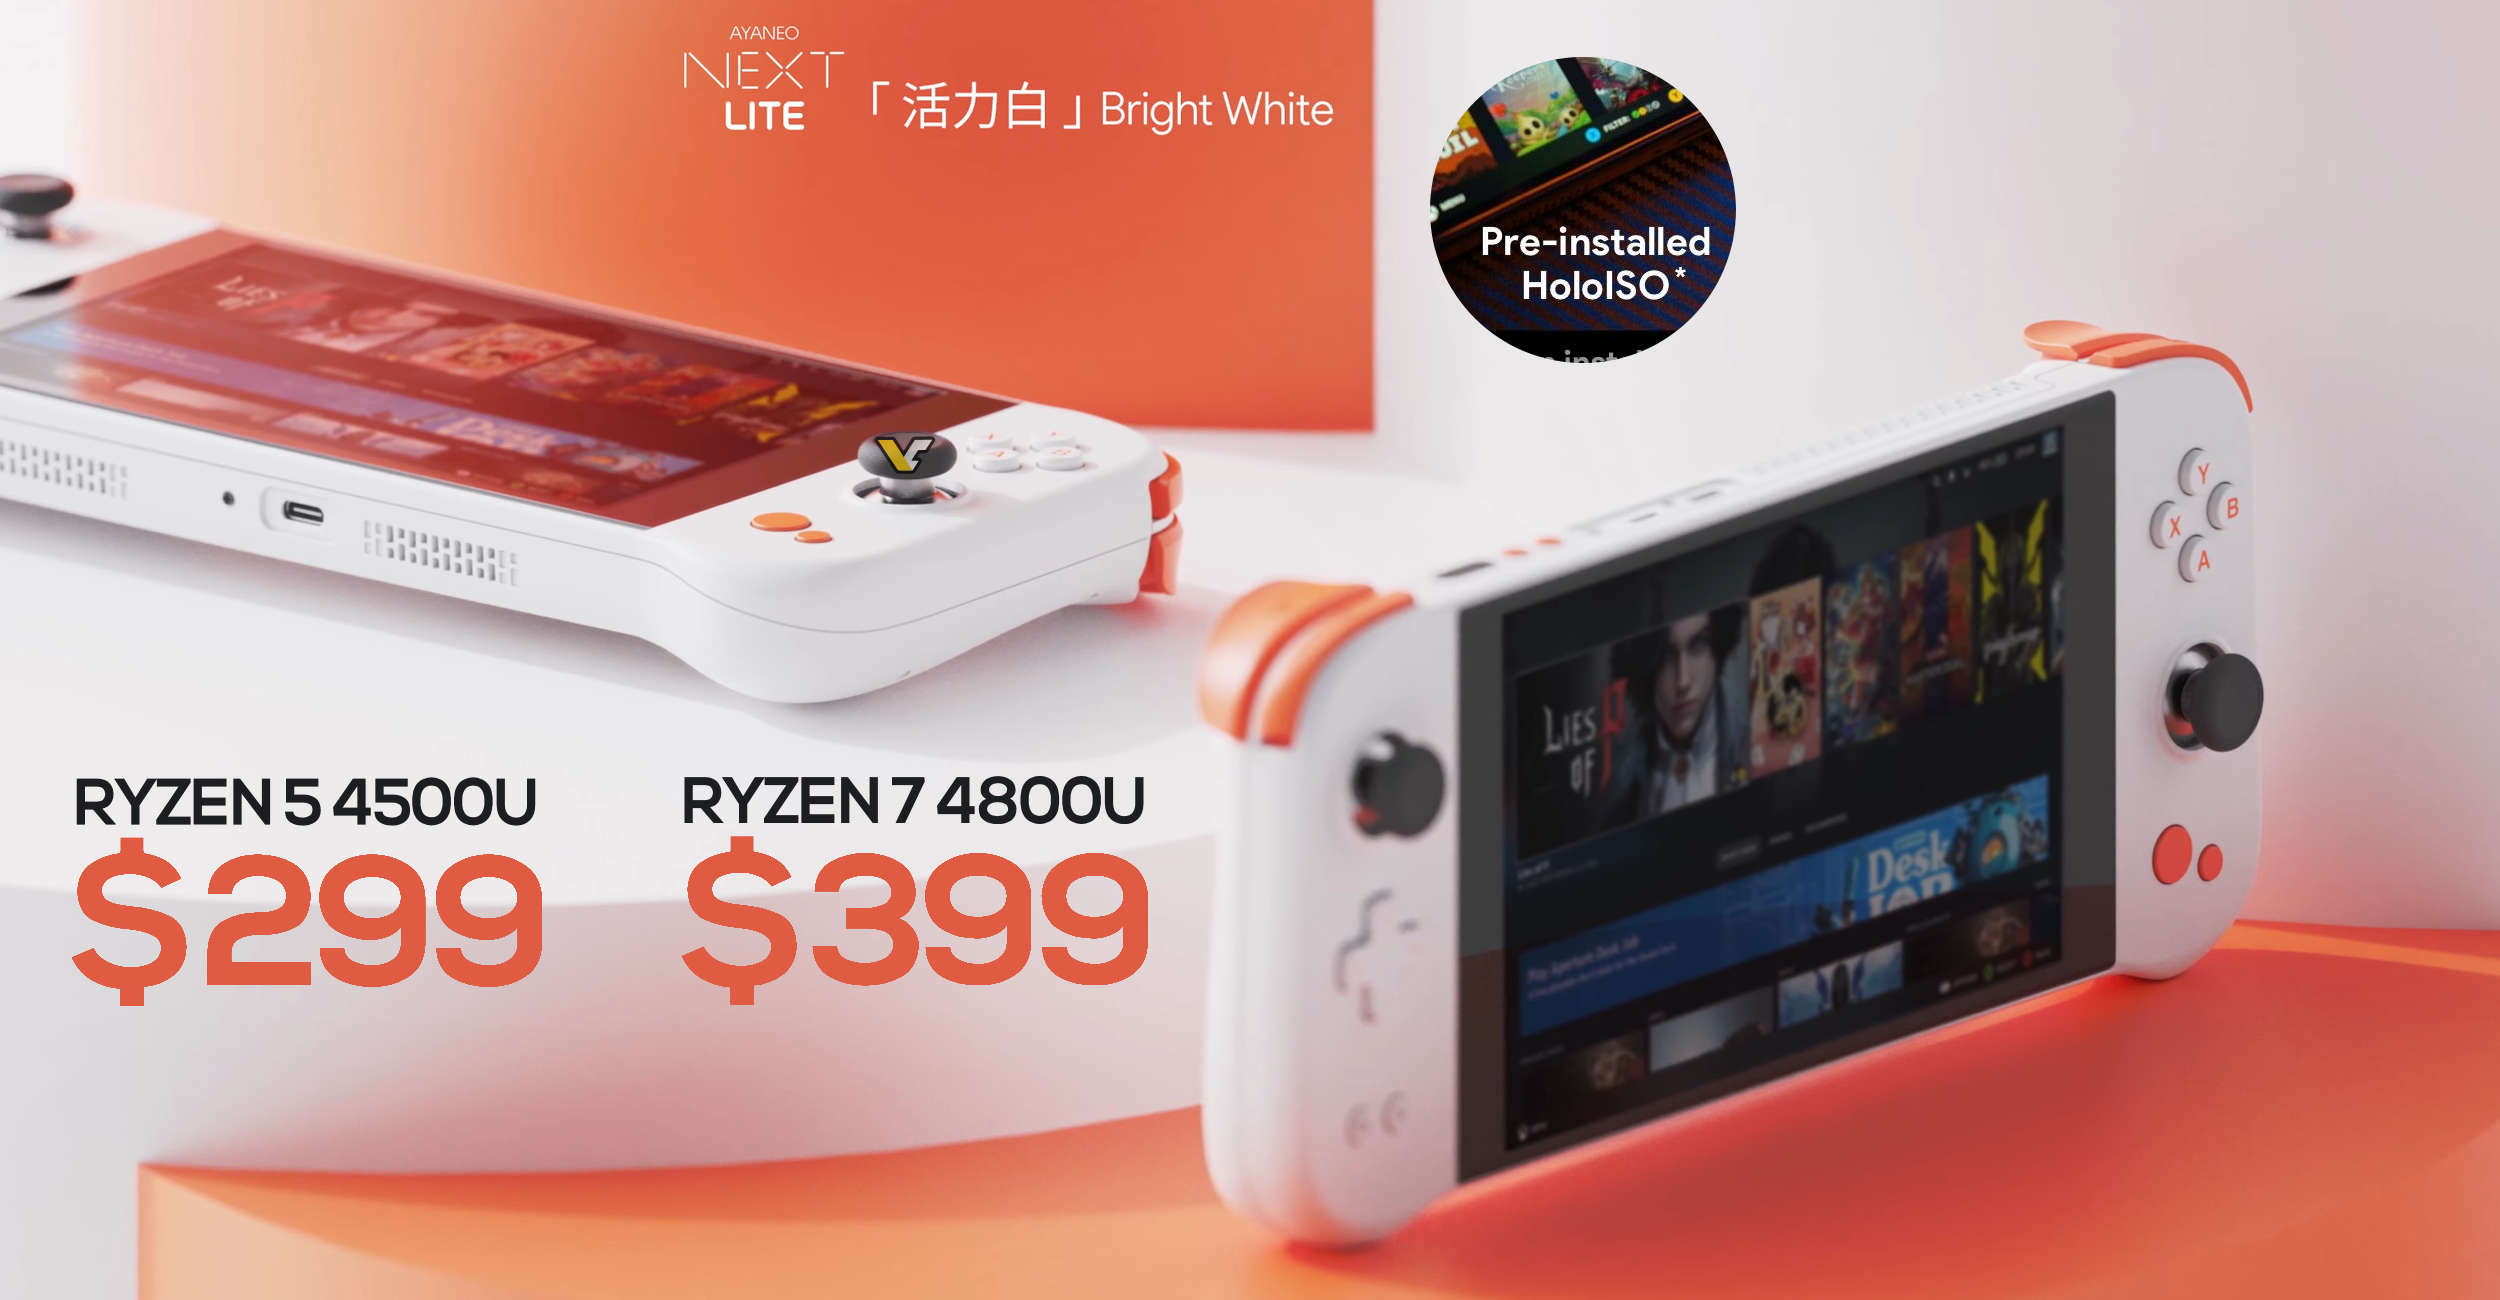 Aya Neo (AMD Ryzen 4500U gaming console) to get two color variants